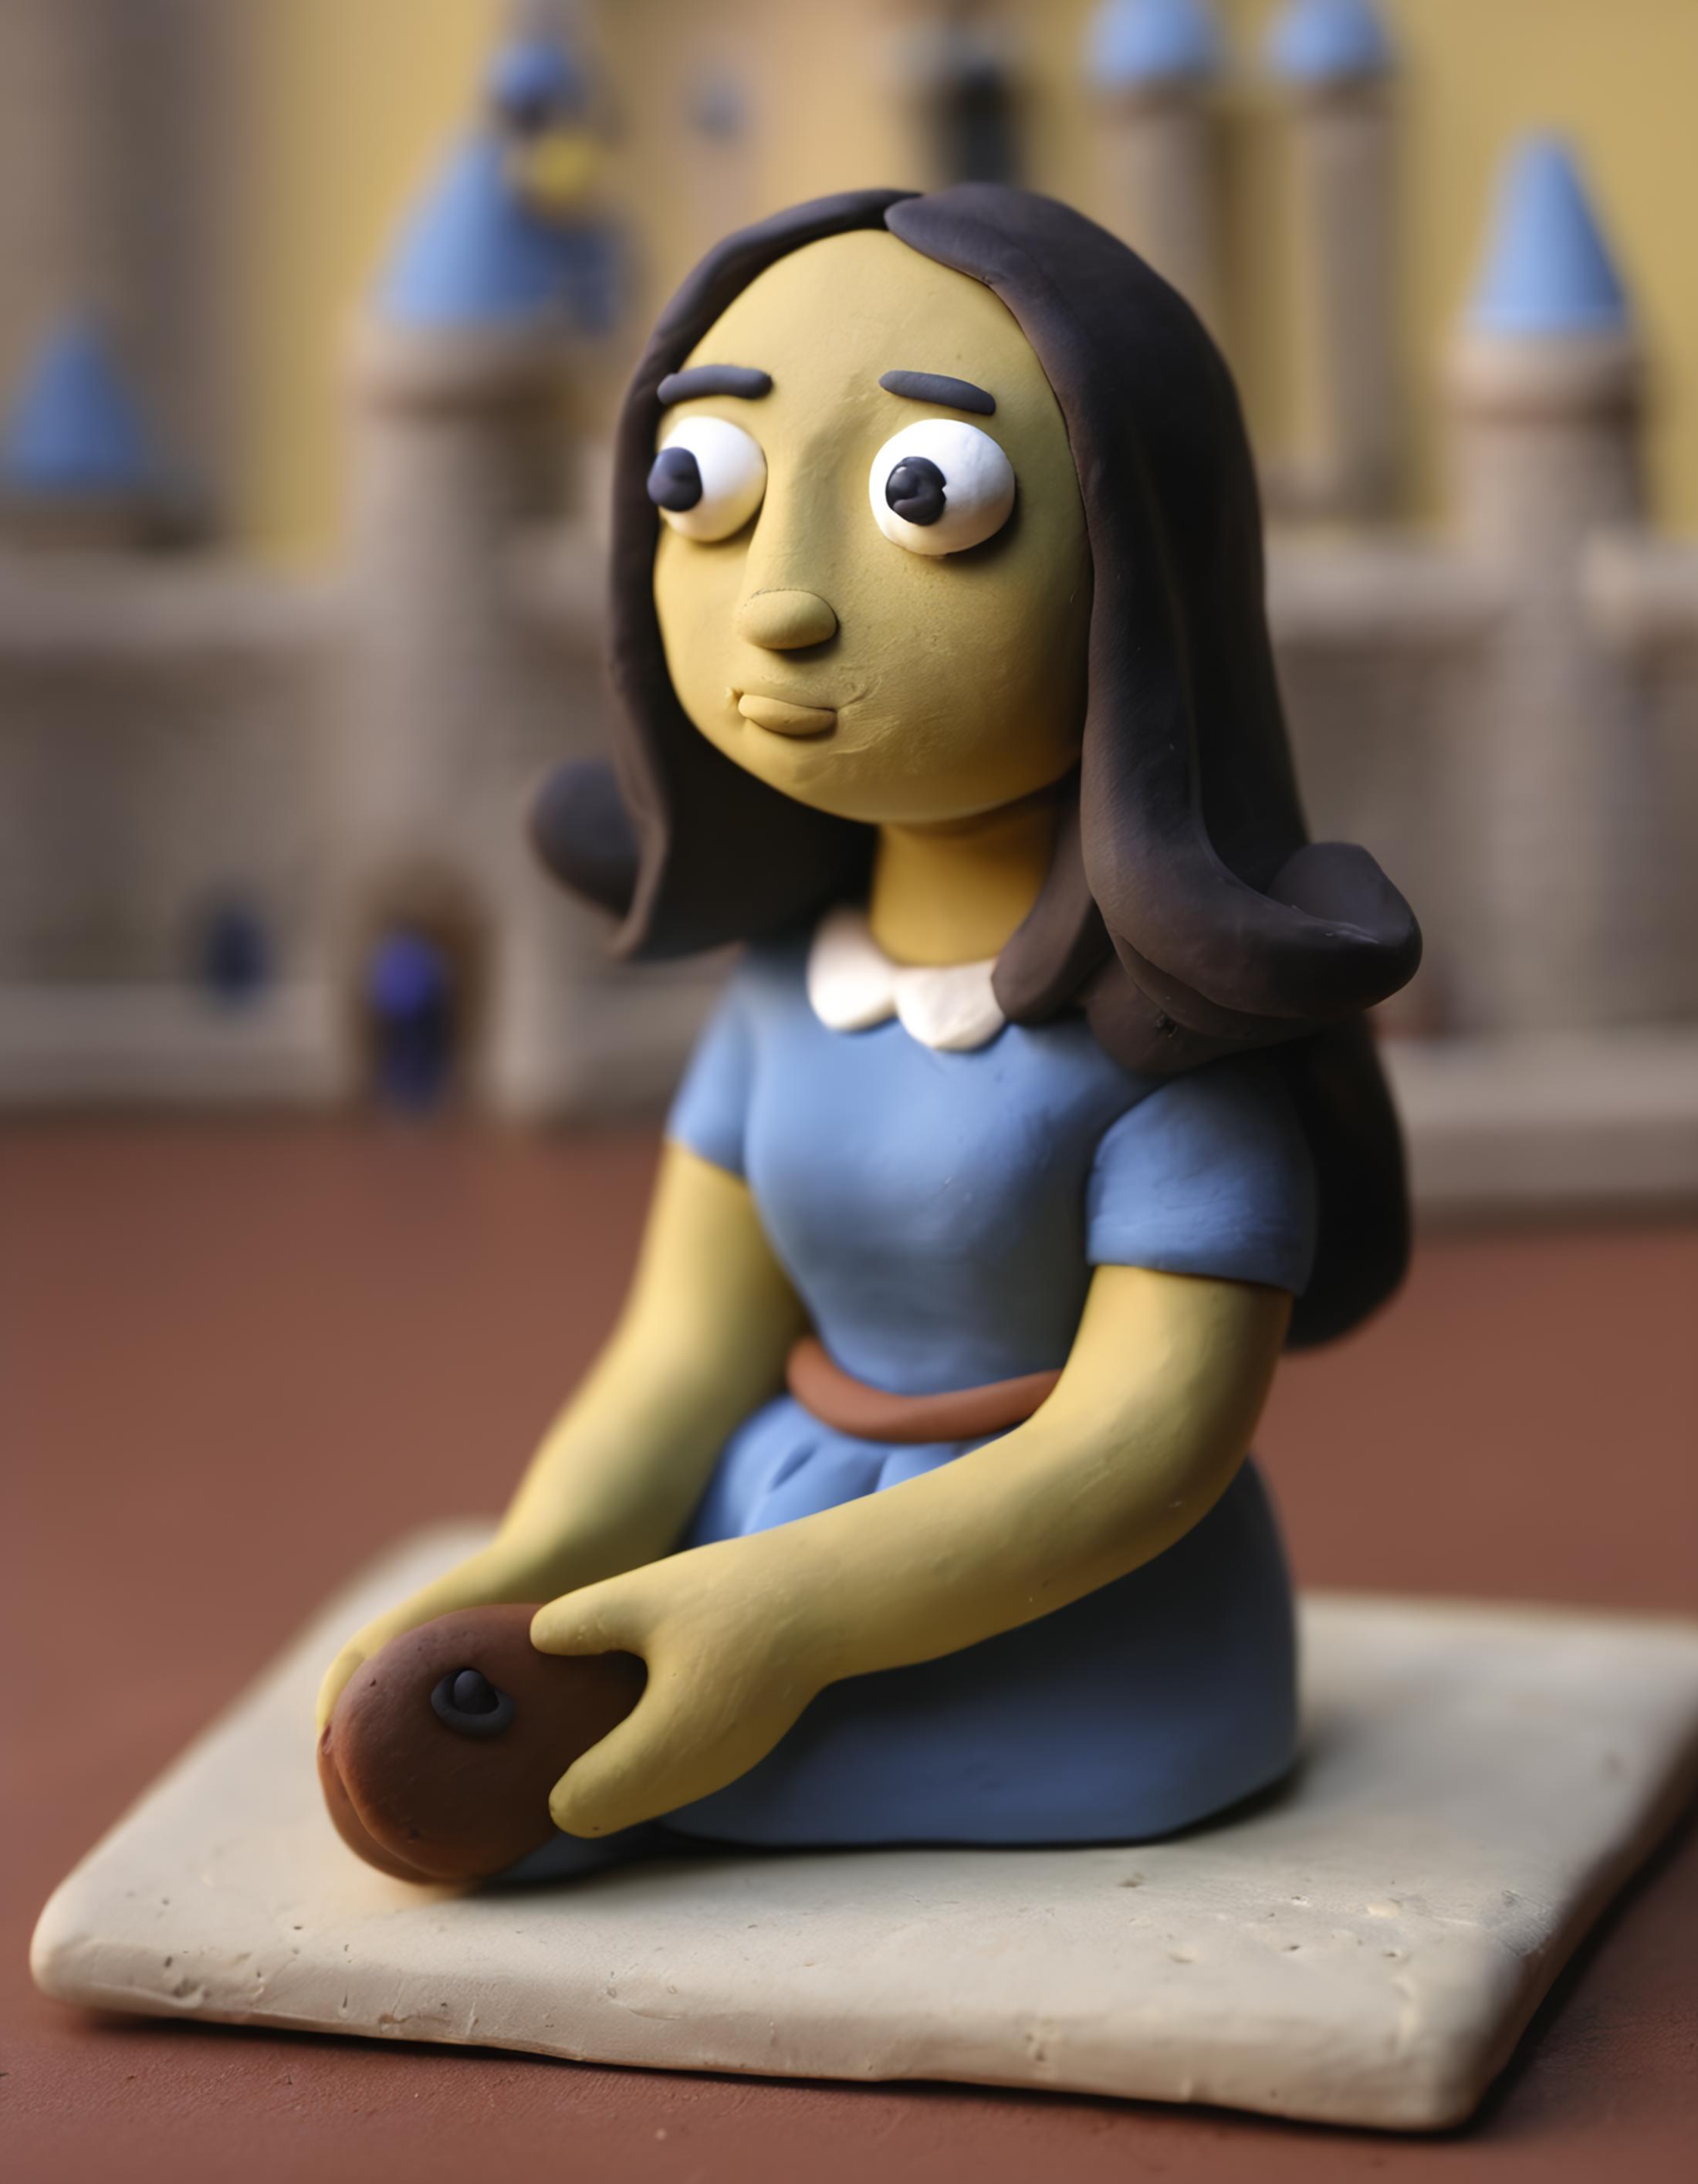 Doctor Diffusion's Claymation Style LoRA image by Standspurfahrer